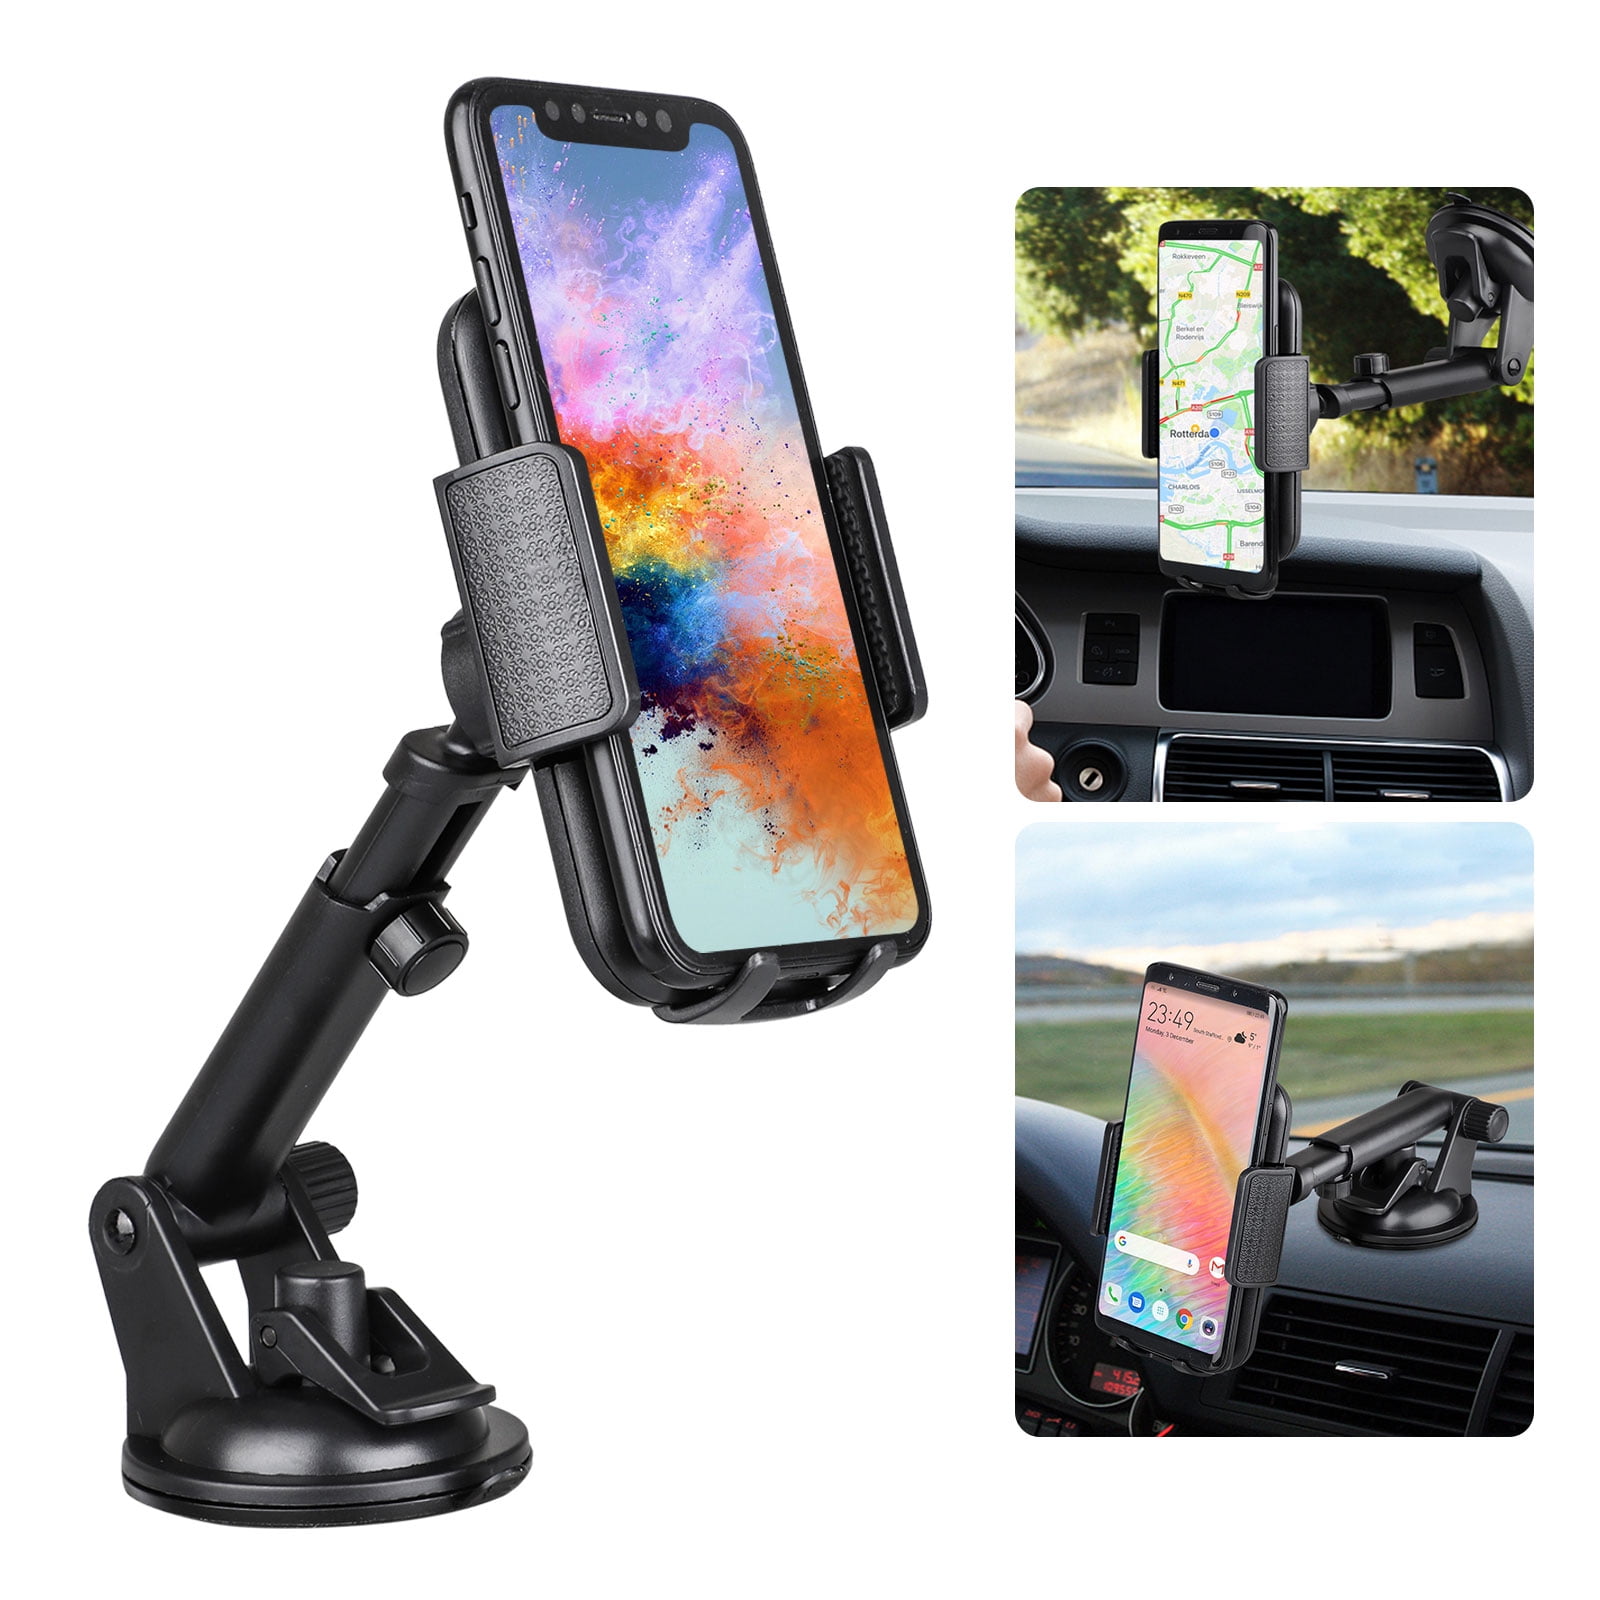 Windshield with Long Arm & Super Suction Hands-Free Phone Holder for Car Dashboard Compatible for iPhone 11/11 Pro/8+/8/X/XR/XS/7 & Samsung S20/S10/S9/S8 -Black Universal Car Phone Mount Easy Clamp 